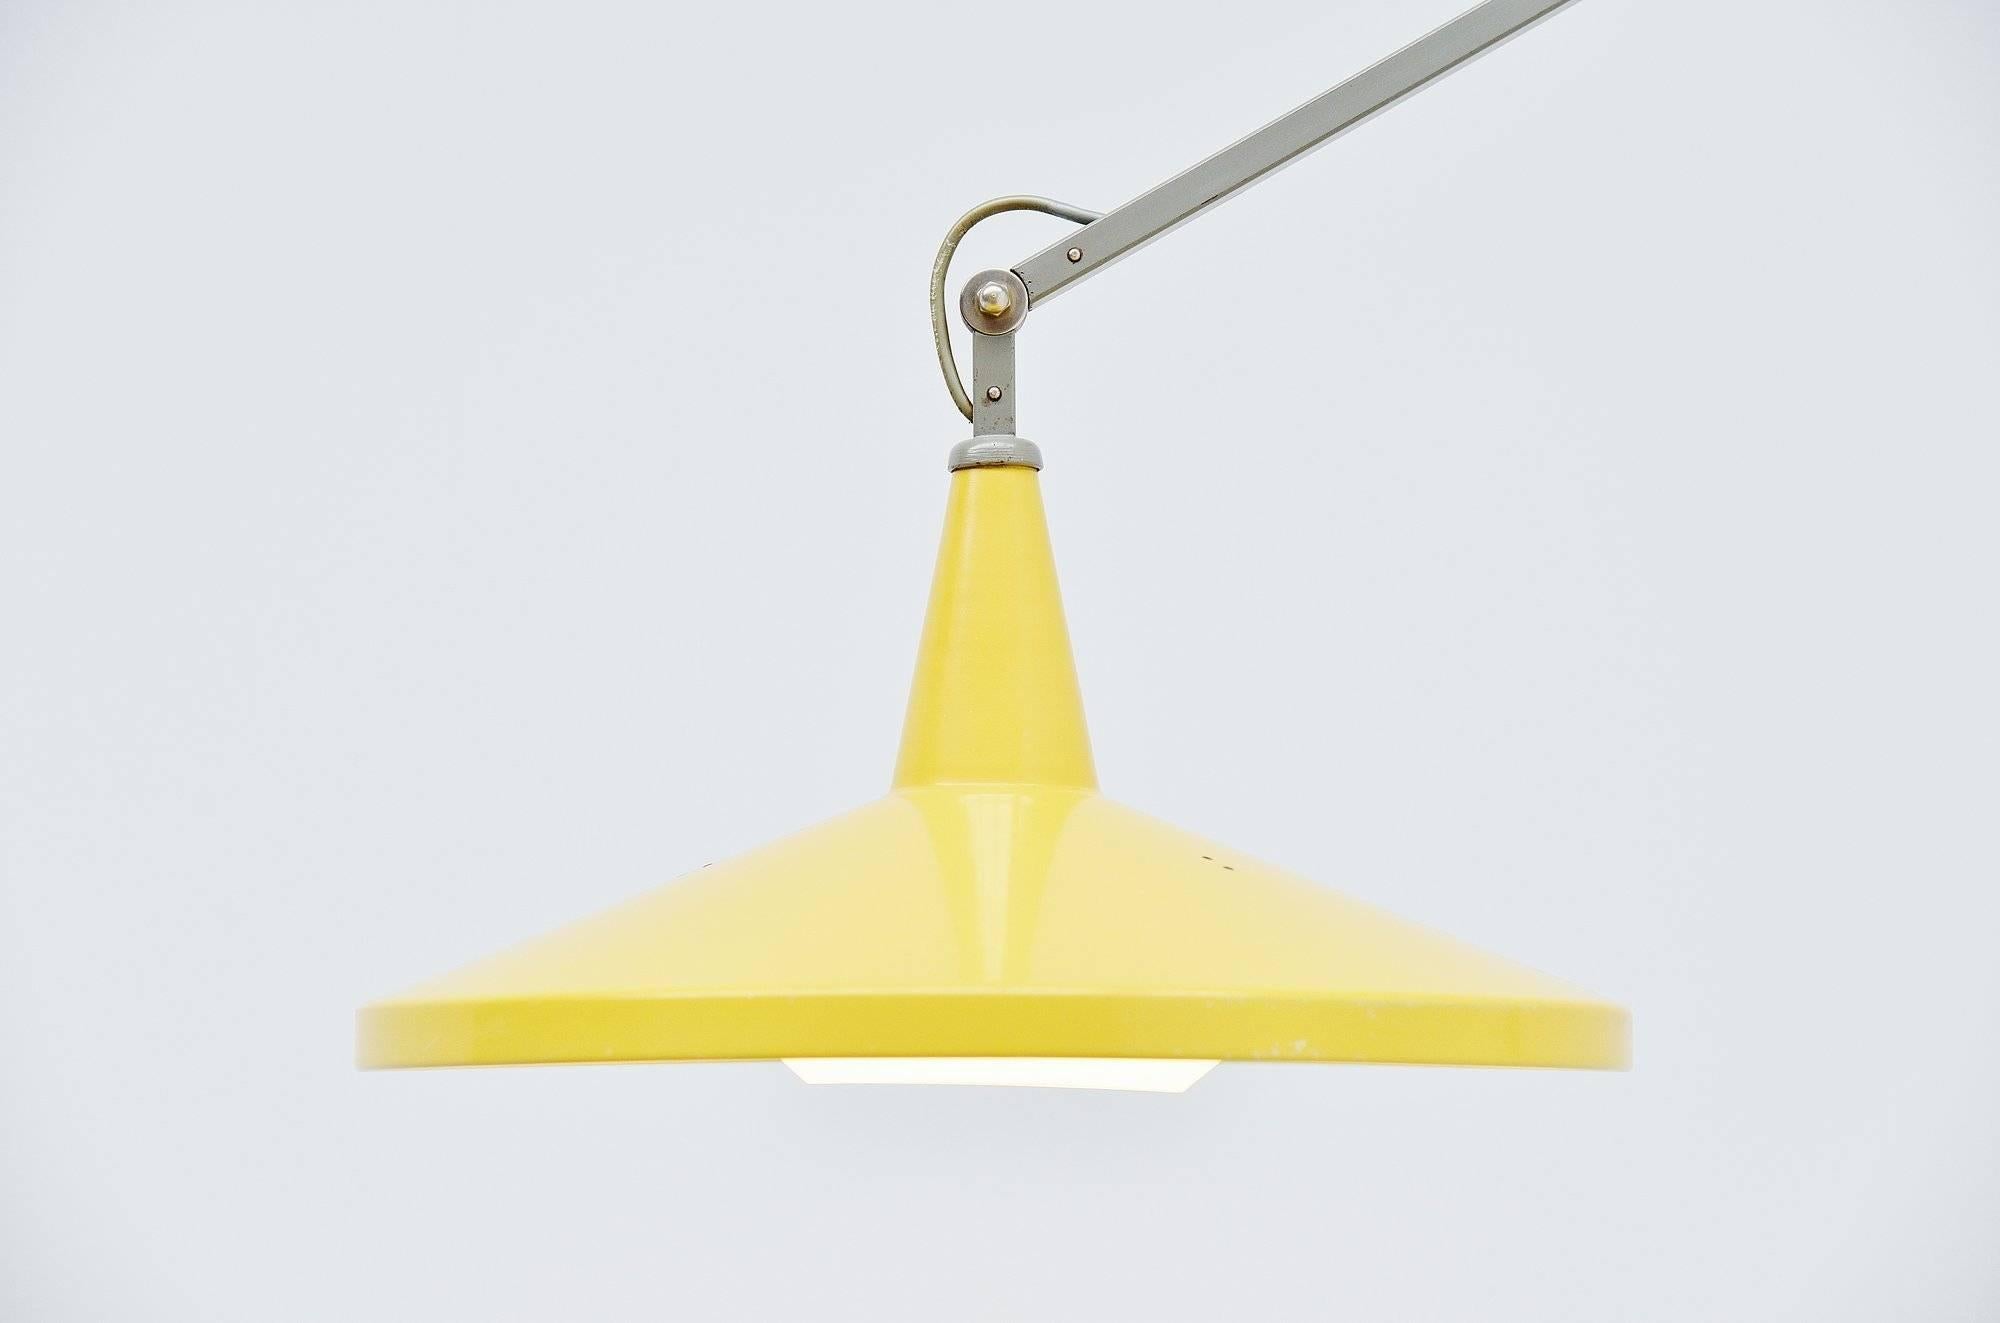 This is for a fantastic wall-mounted articulating lamp designed by Wim Rietveld, son of Gerrit Rietveld for Gispen in 1955. The lamp is mod no. 4050 and it has a very nice and original yellow, typical Gispen shade. The lamp comes with the original